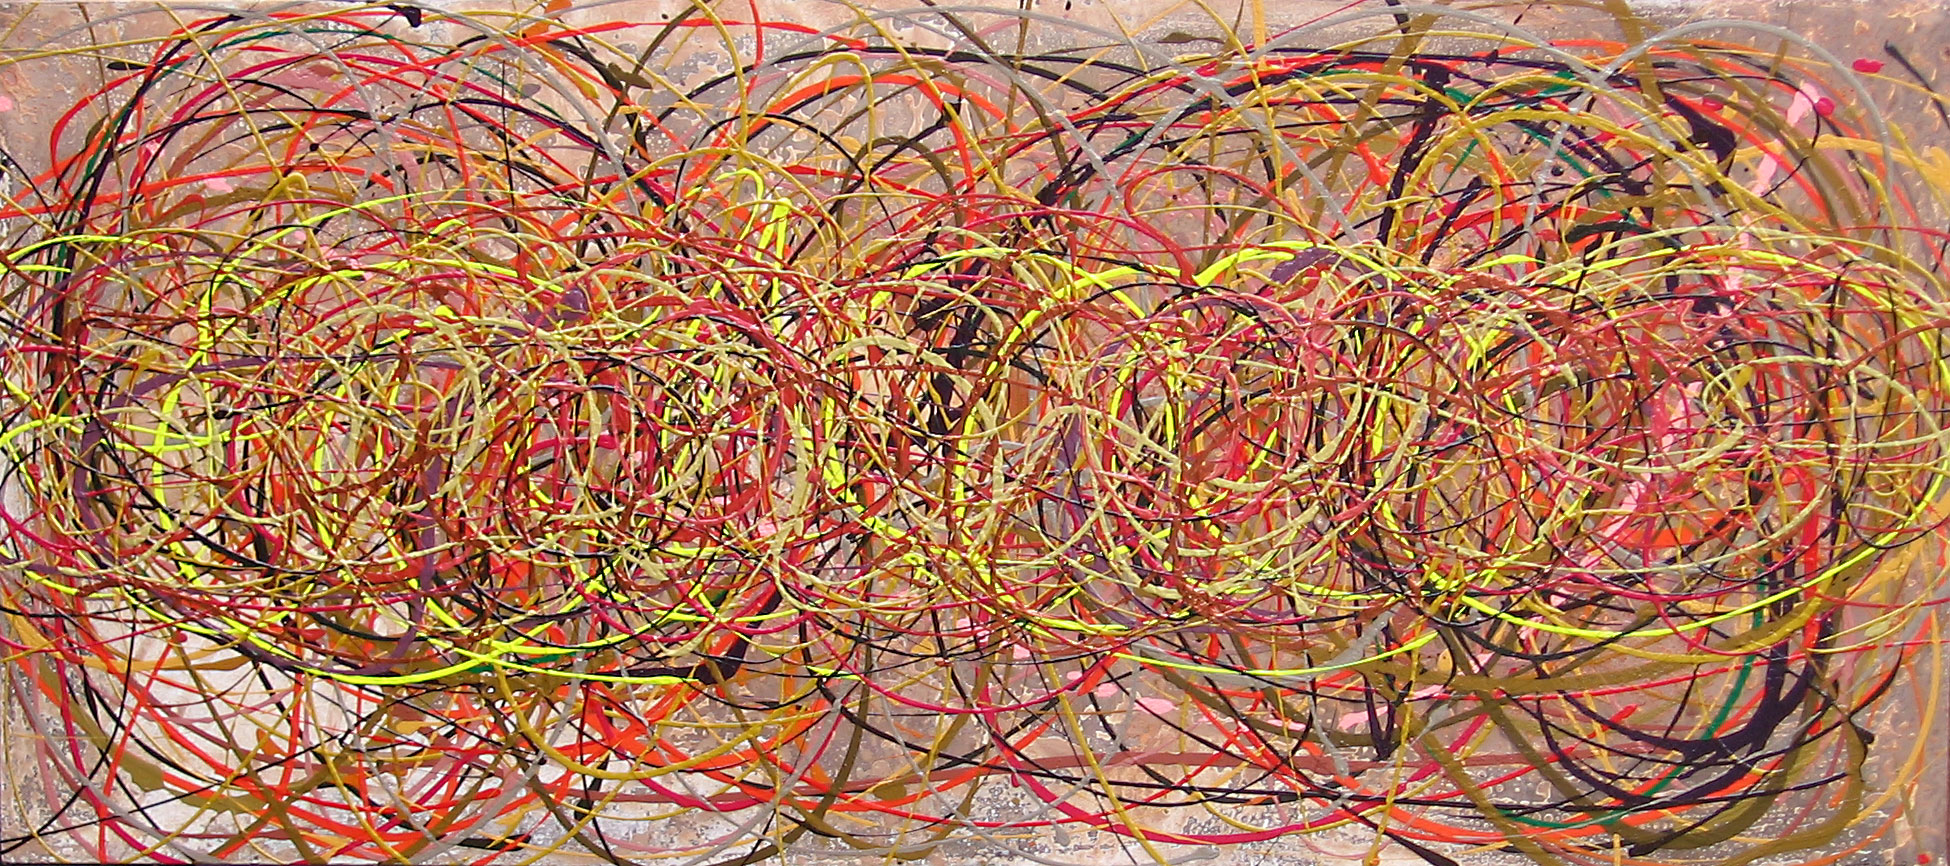 YELLOW TANGLE  NO.532 DATED 2008 BY LUCIEN SIMON